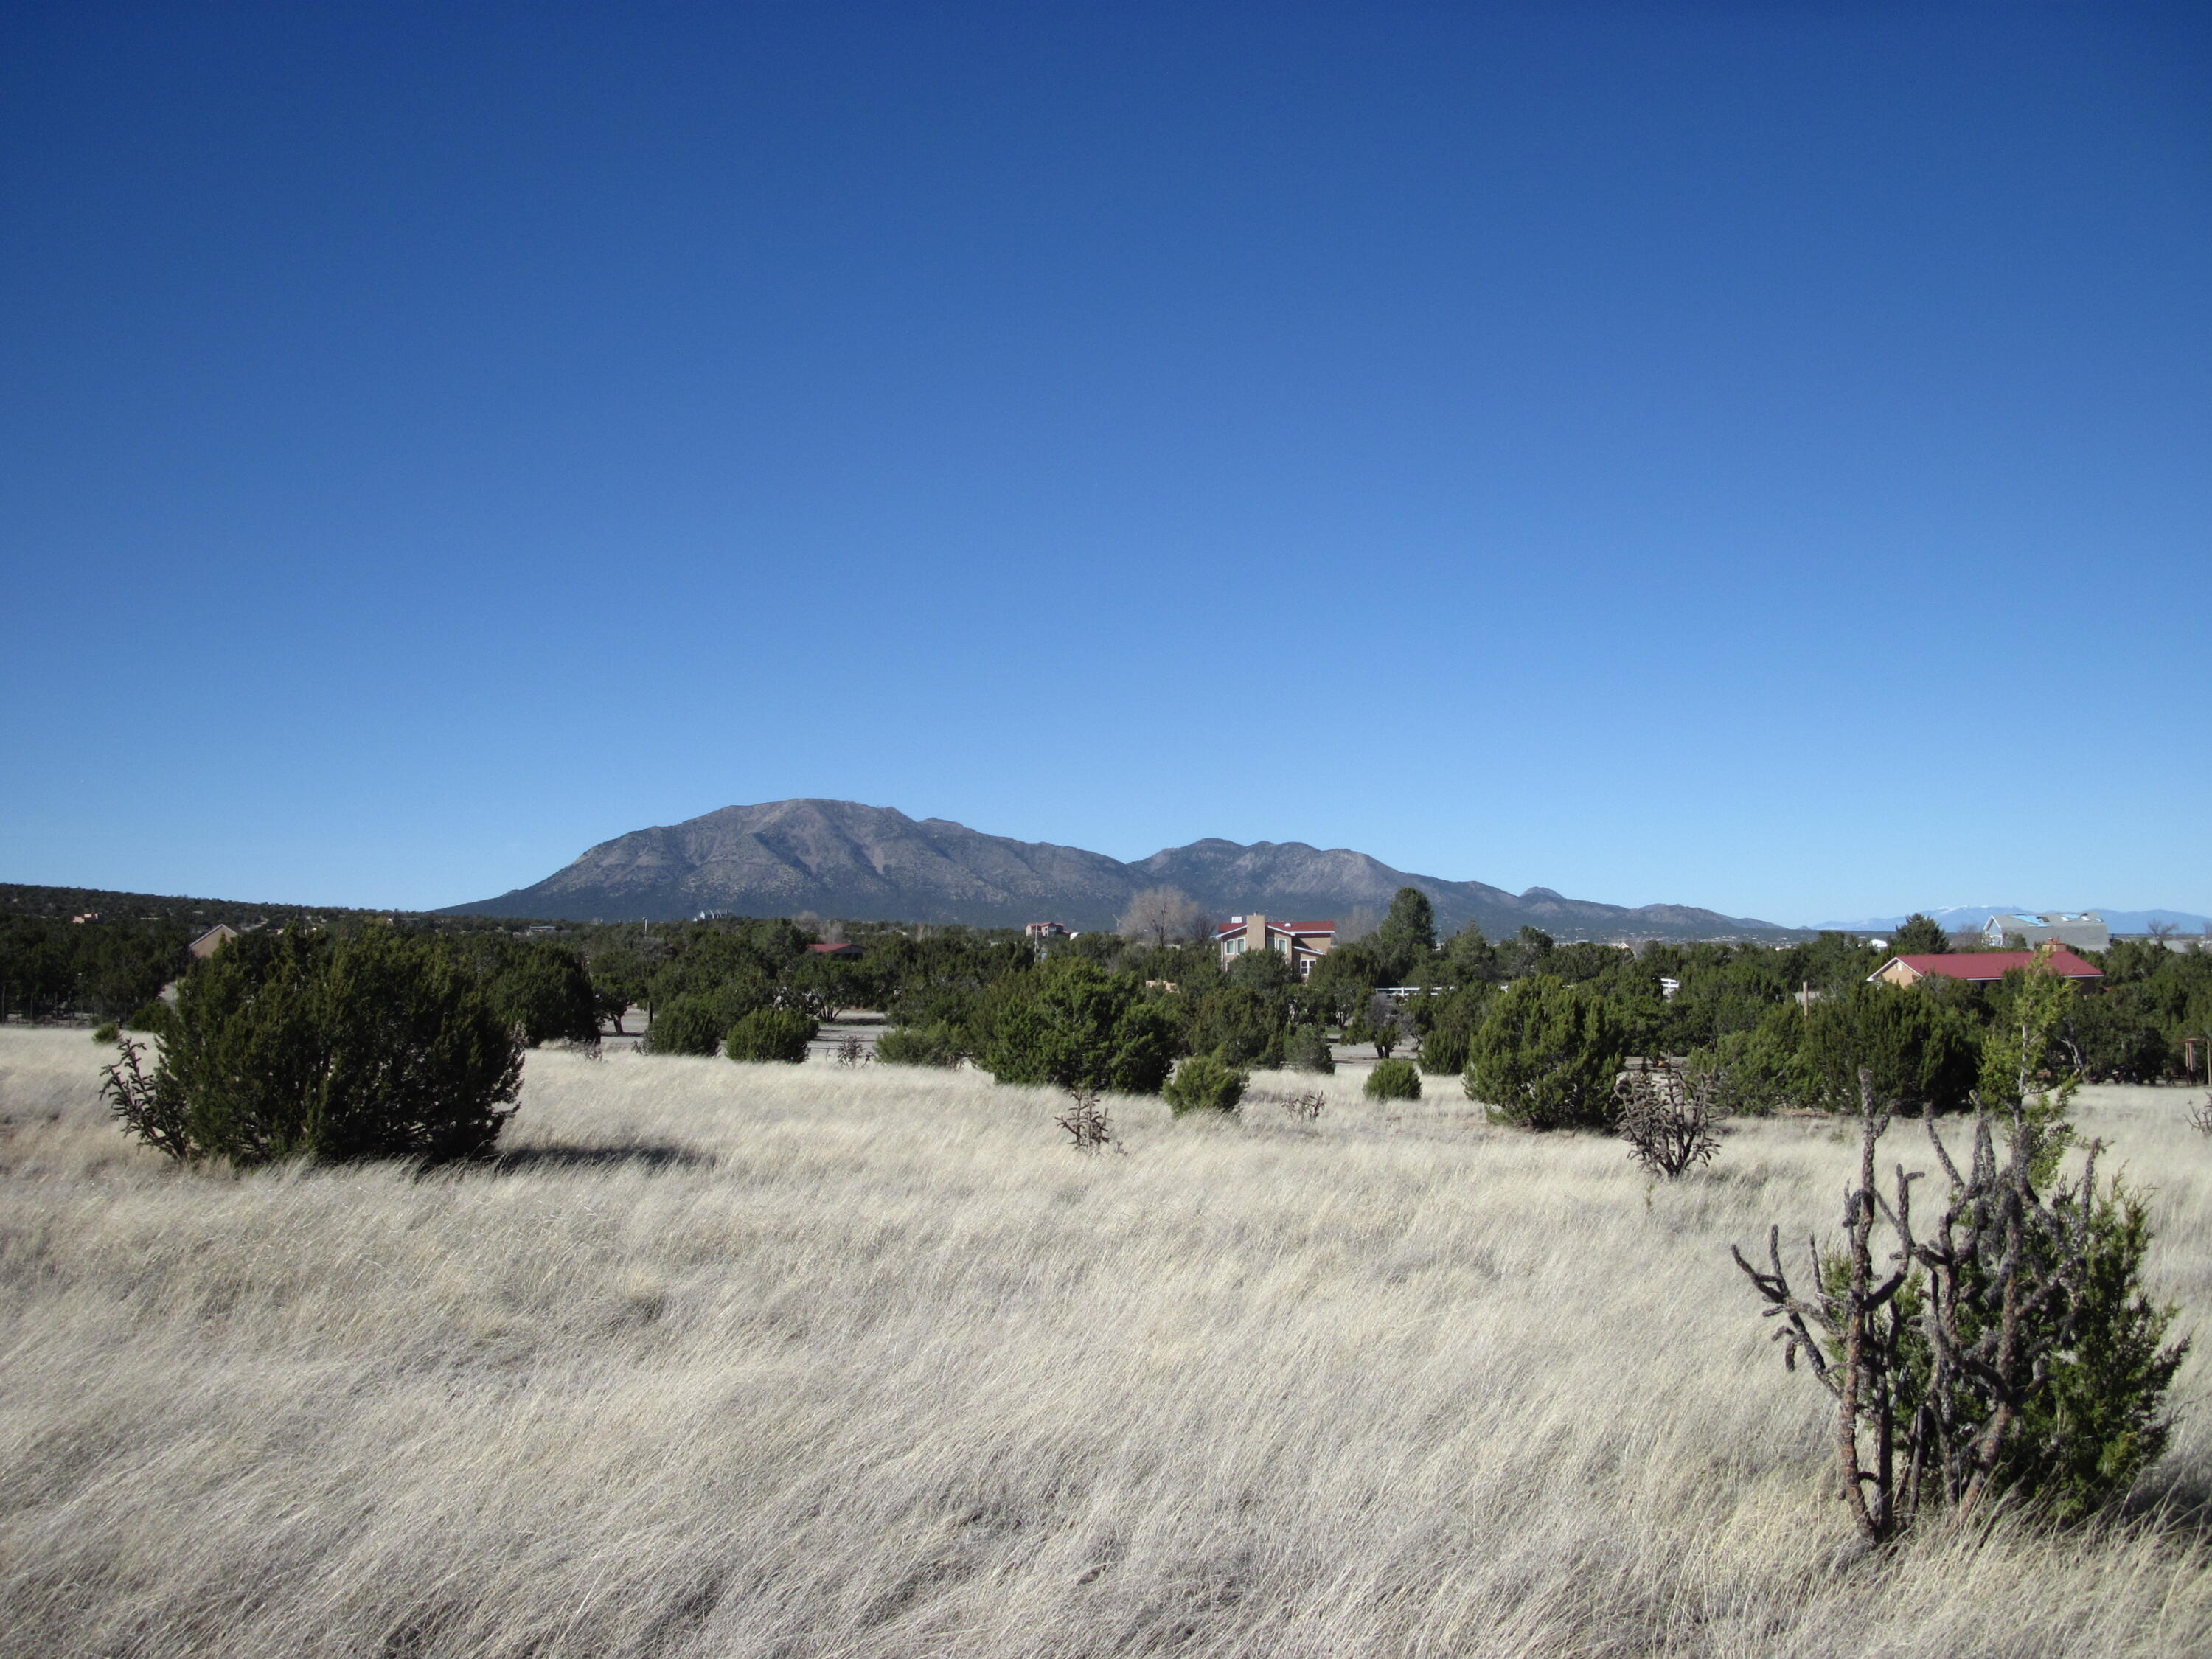 48 Cloonagh Road, Edgewood, New Mexico 87015, ,Land,For Sale,48 Cloonagh Road,1032282